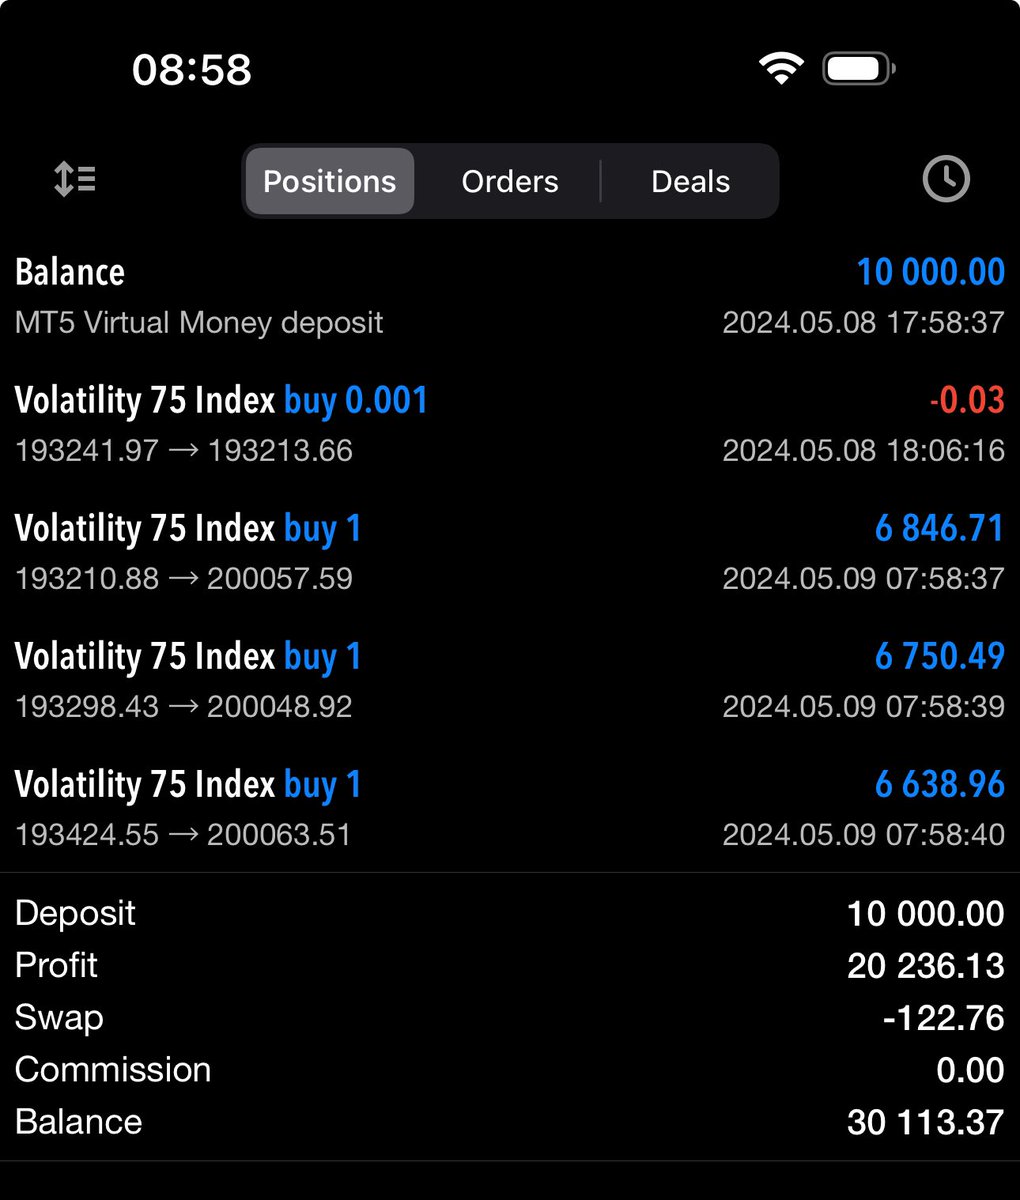 Meanwhile, i dusted off my Deriv account, made a $10K DEMO account to play with until i’m ready to start depositing on it to start flipping aggressively on synthetics. 

200% flipped. Yeah i know it’s demo, blah blah blah, but my TA skills is not to be messed with. 

Tell 01C,